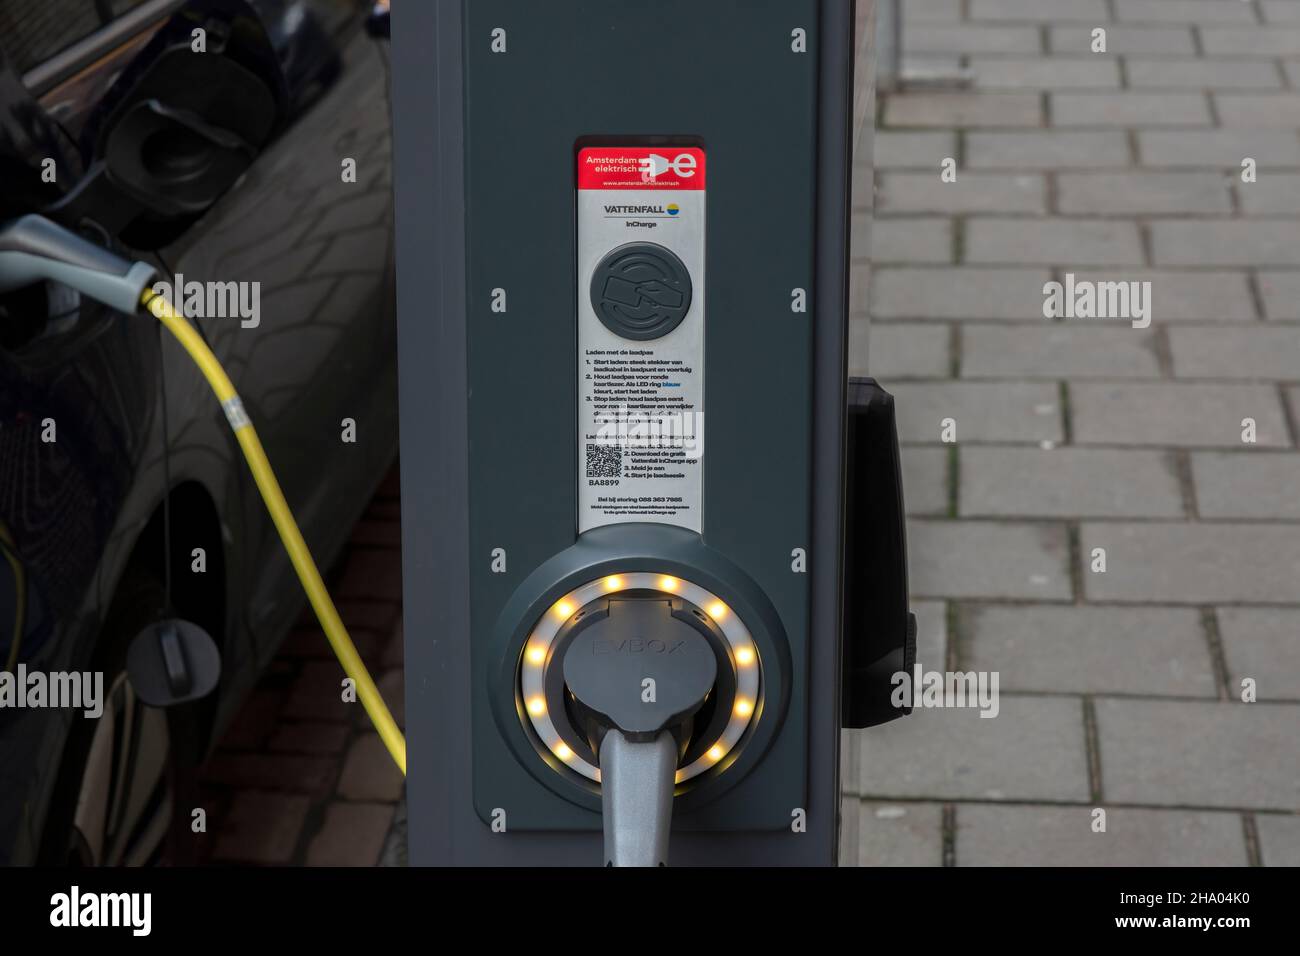 Vattenfall Electric Car Charging A Car At Amsterdam The Netherlands 6-12-2021 Stock Photo